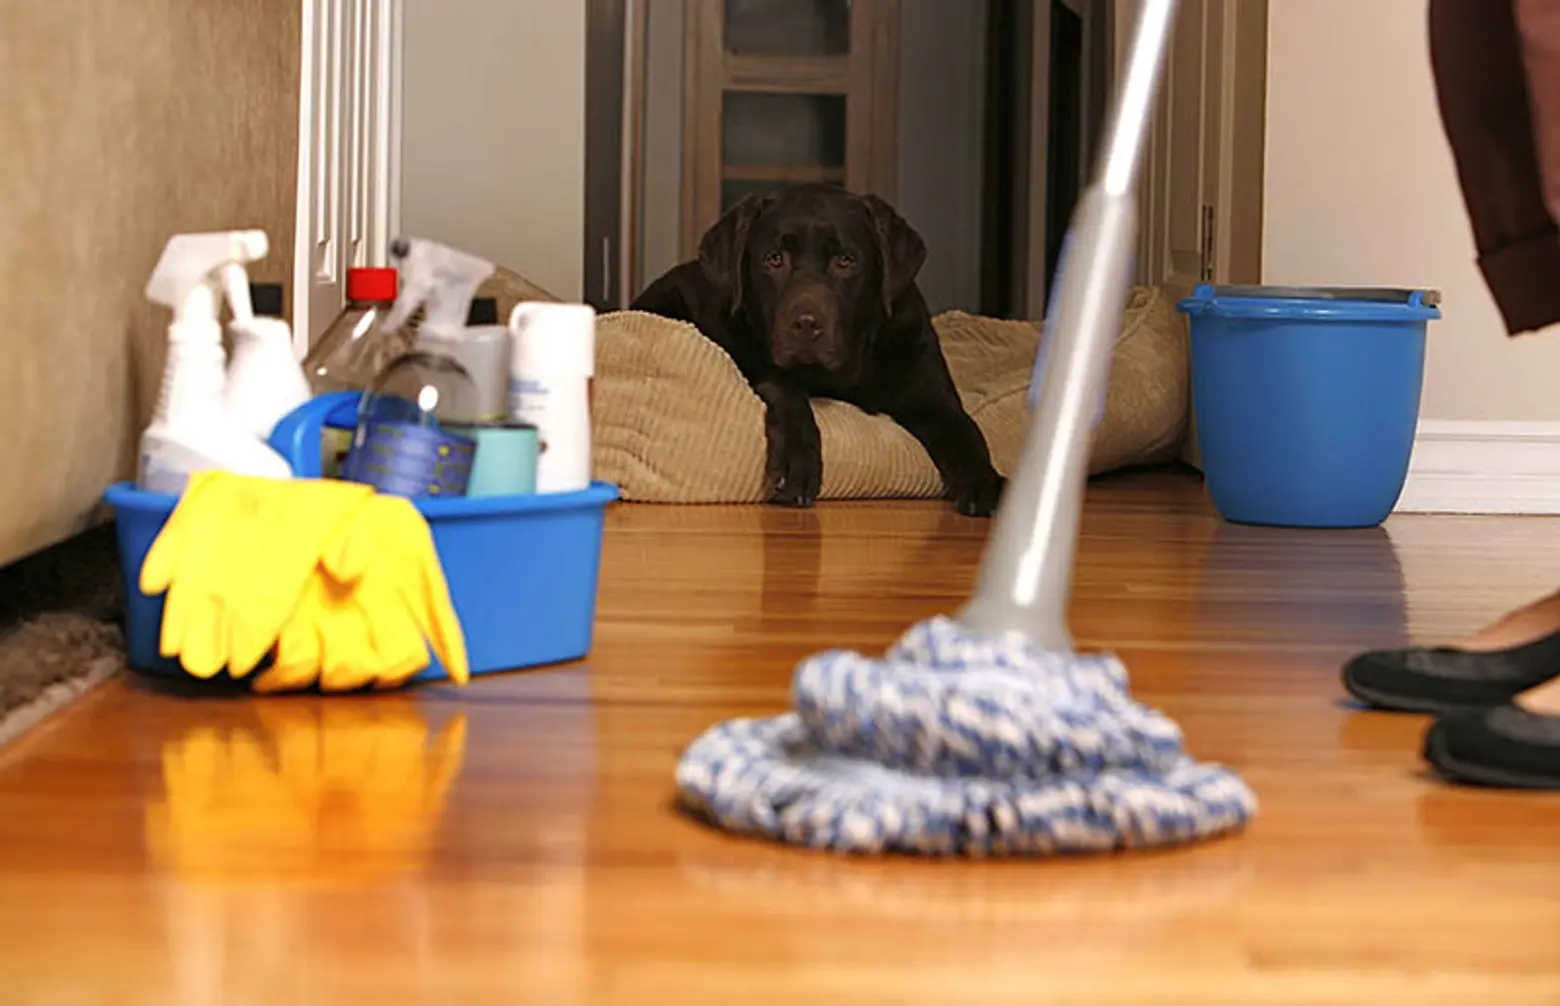 Cleaning products, dog, mopping